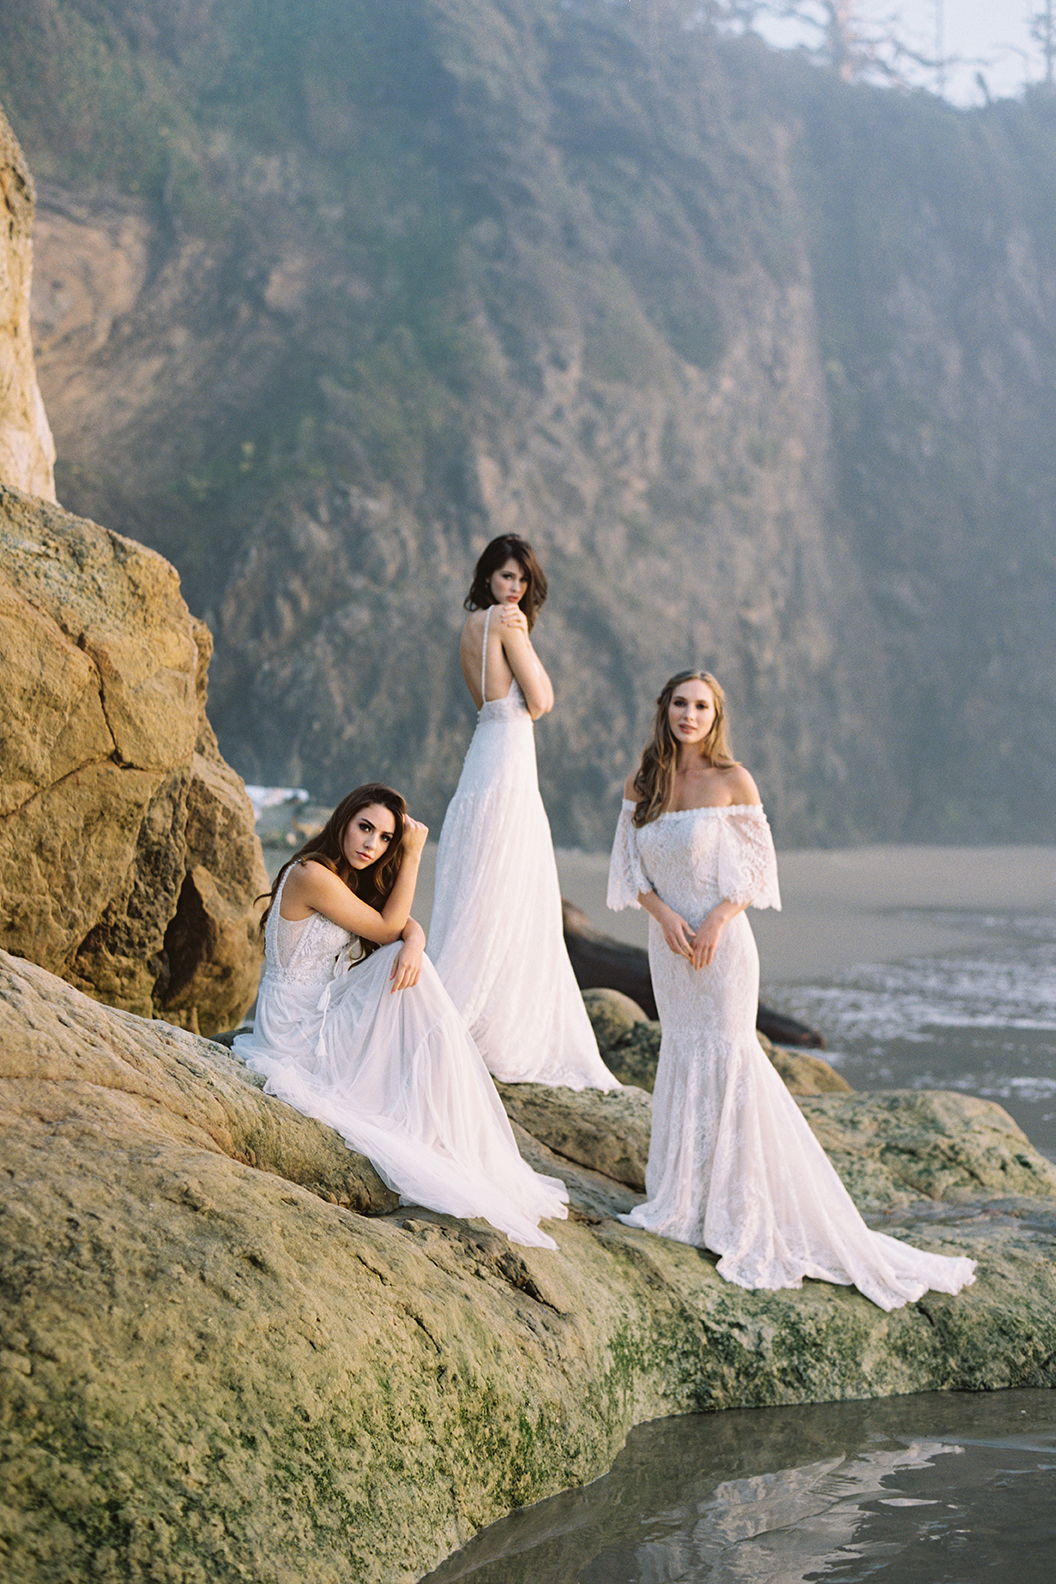 Allure Bridal’s Dreamy Boho Wilderly Bride Wedding Dress Collection (And Giveaway!) | Brumwell Wells Photography 5